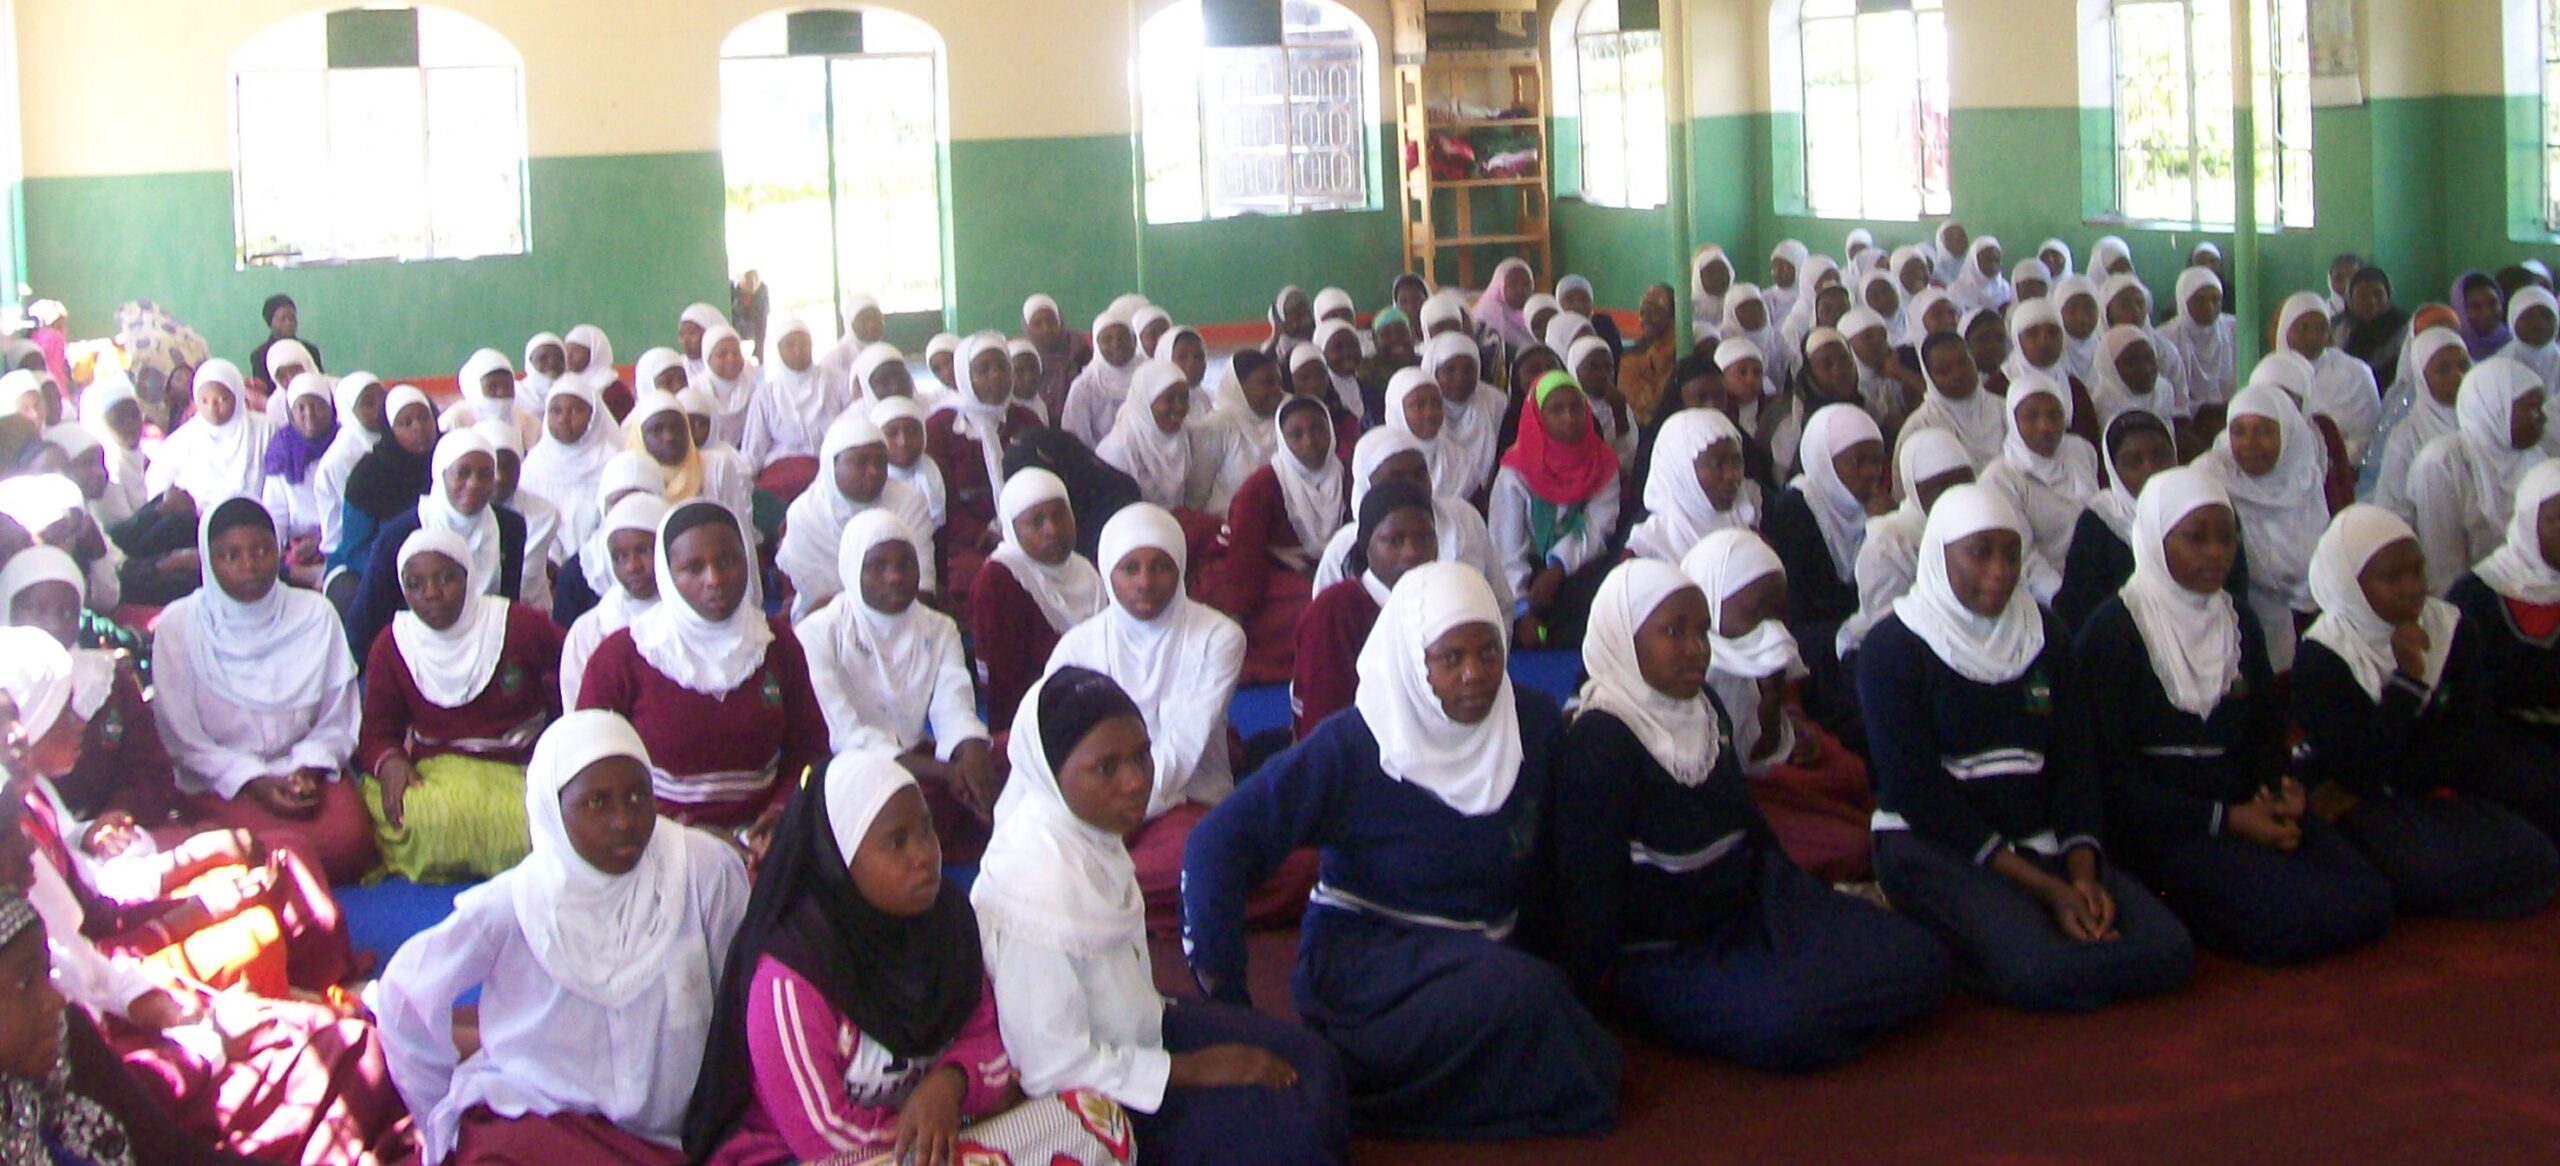 Freedom of Religion in the Light of Educational Rights in Ghana: The Case of the Muslim Student